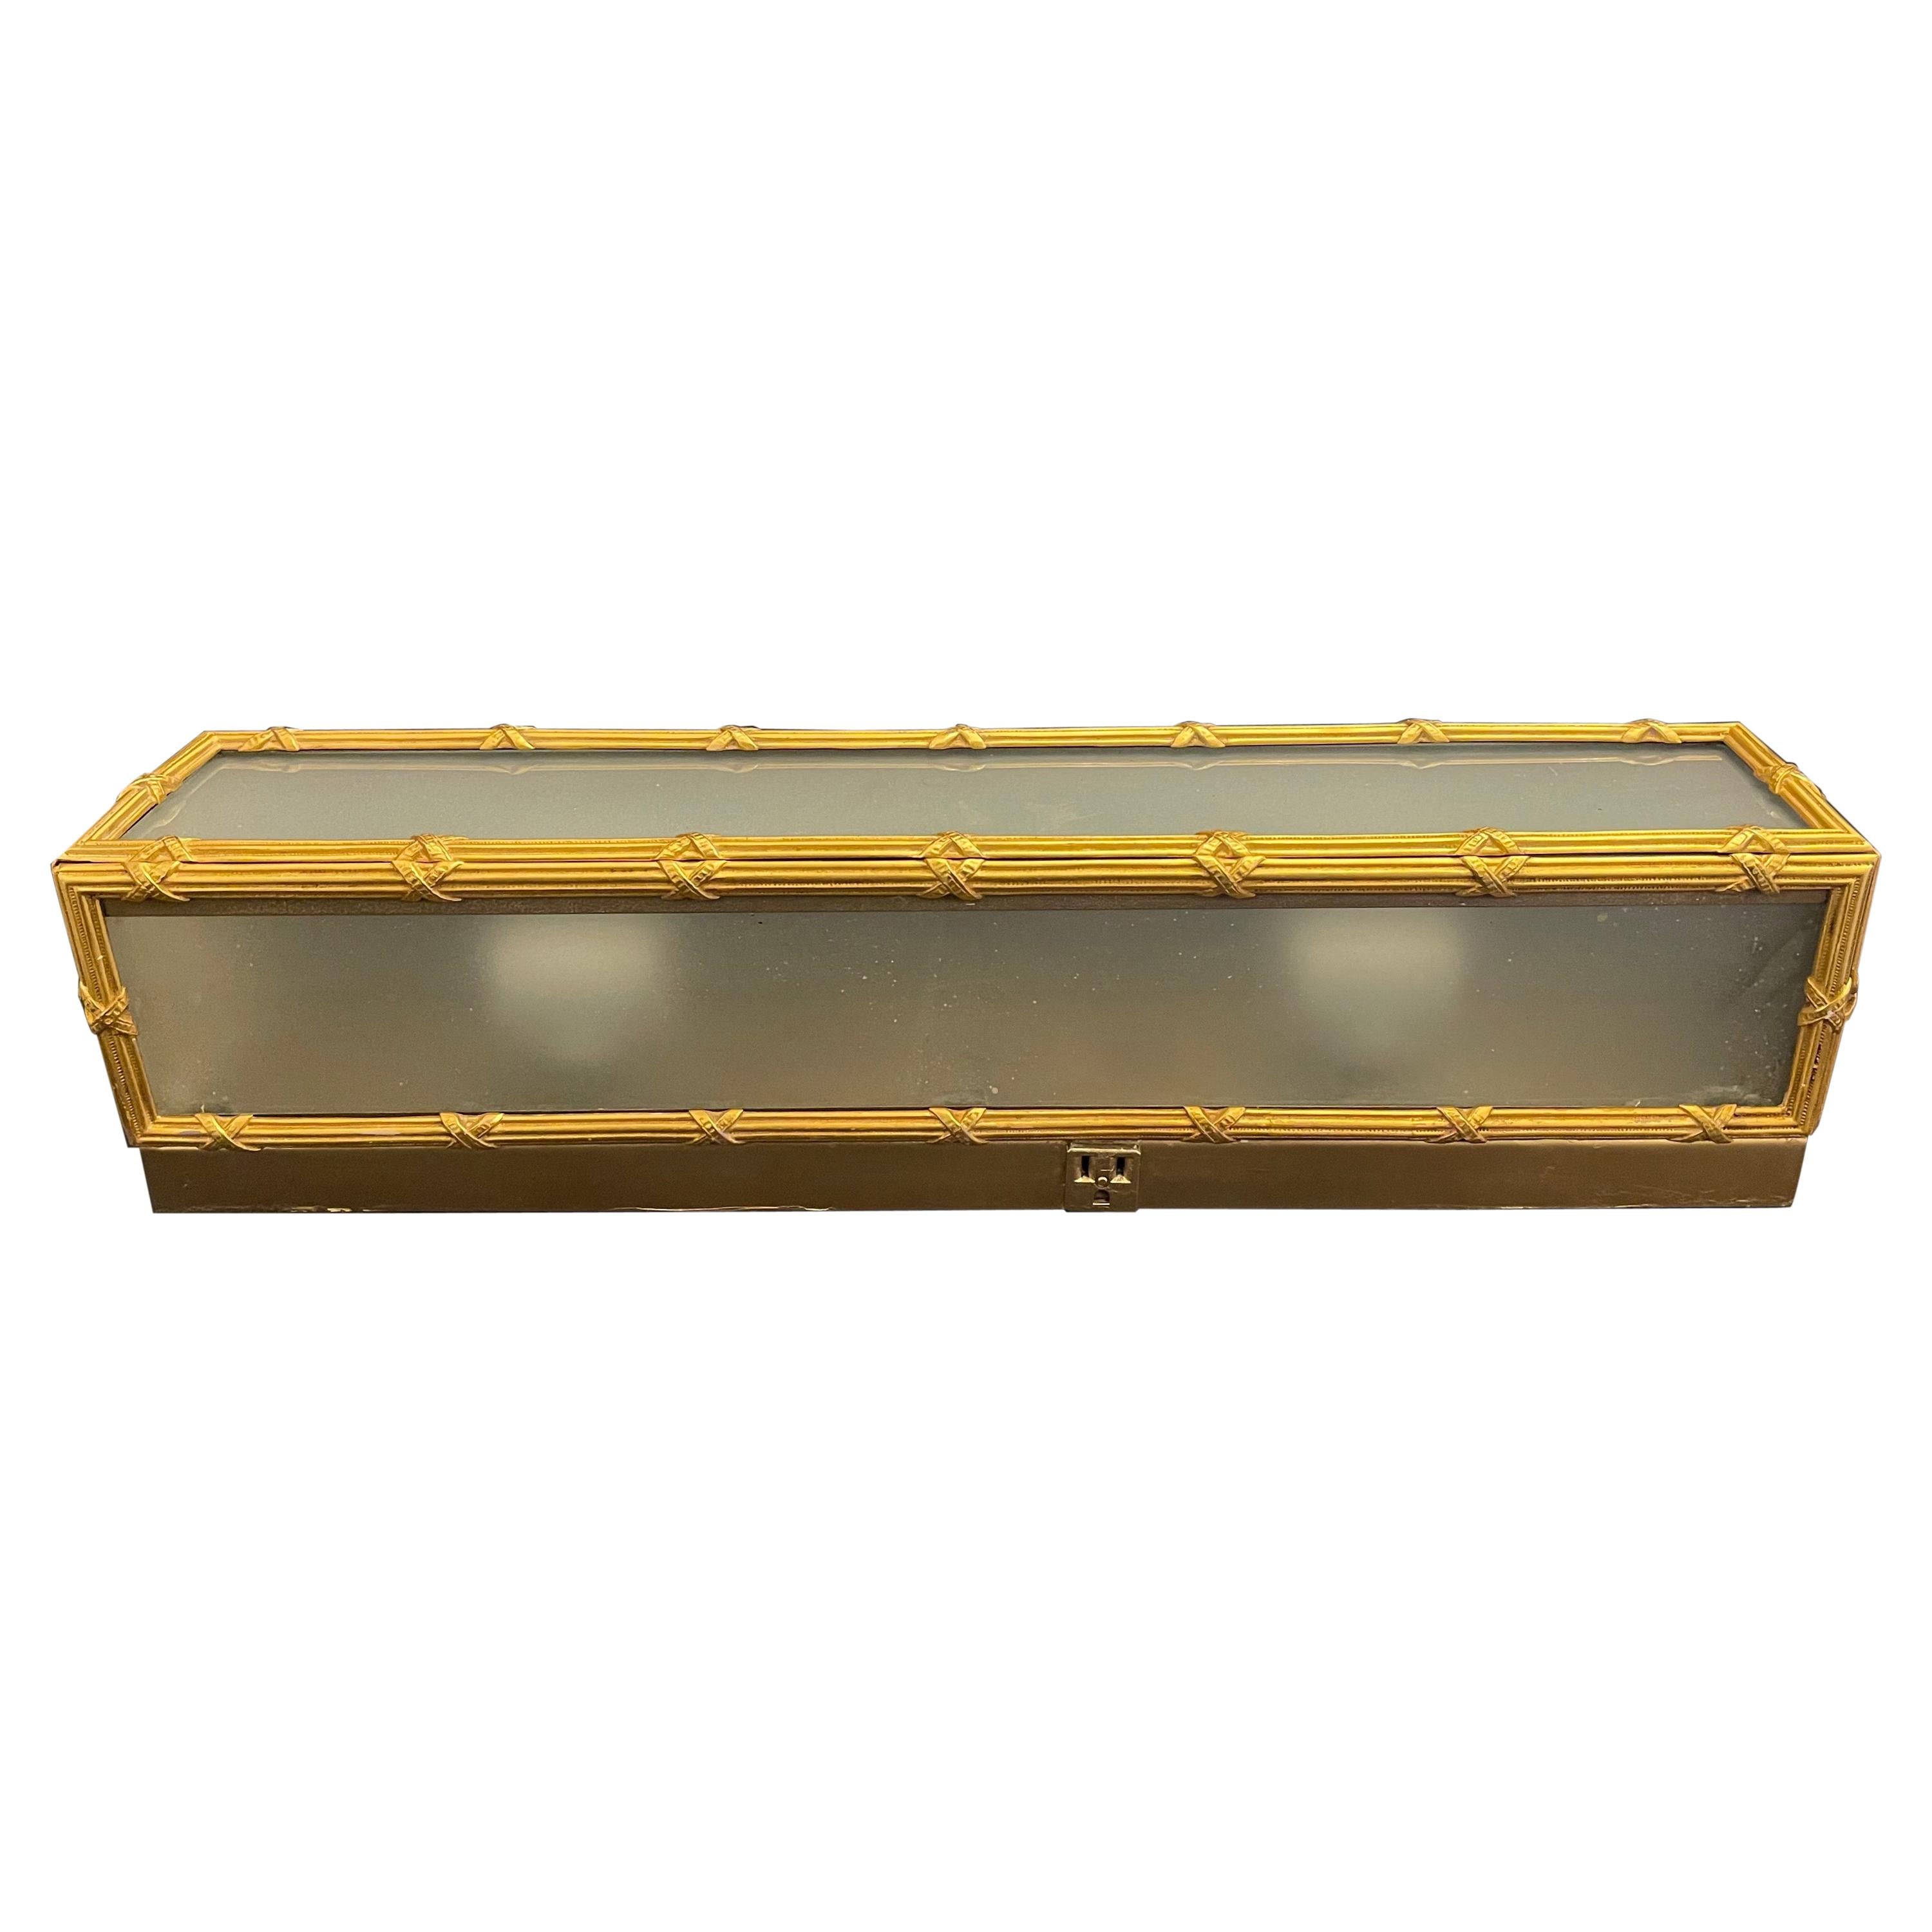 Wonderful Sherle Wagner Reeded X Bronze Sconce Light Panel Glass Box Fixture For Sale